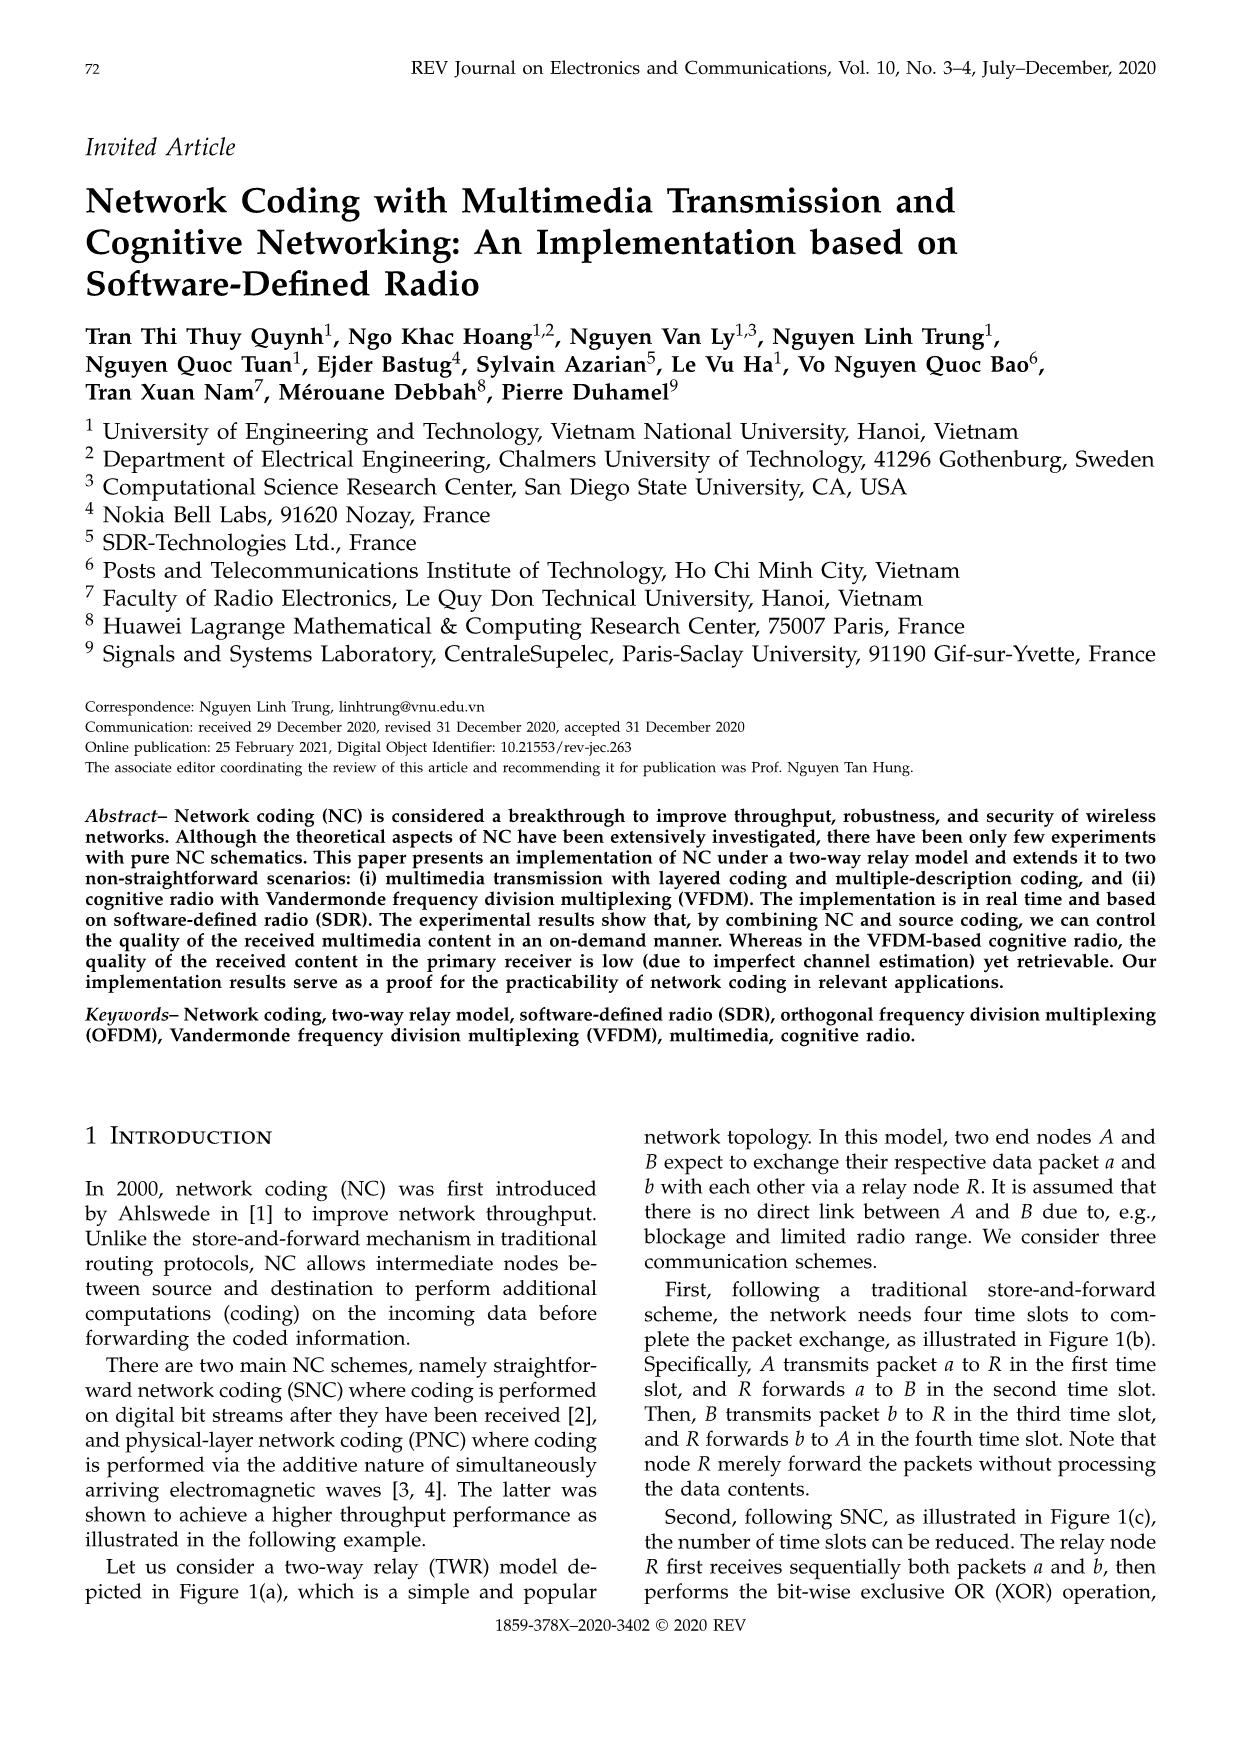 Network coding with multimedia transmission and cognitive networking: An implementation based on software-defined radio trang 1